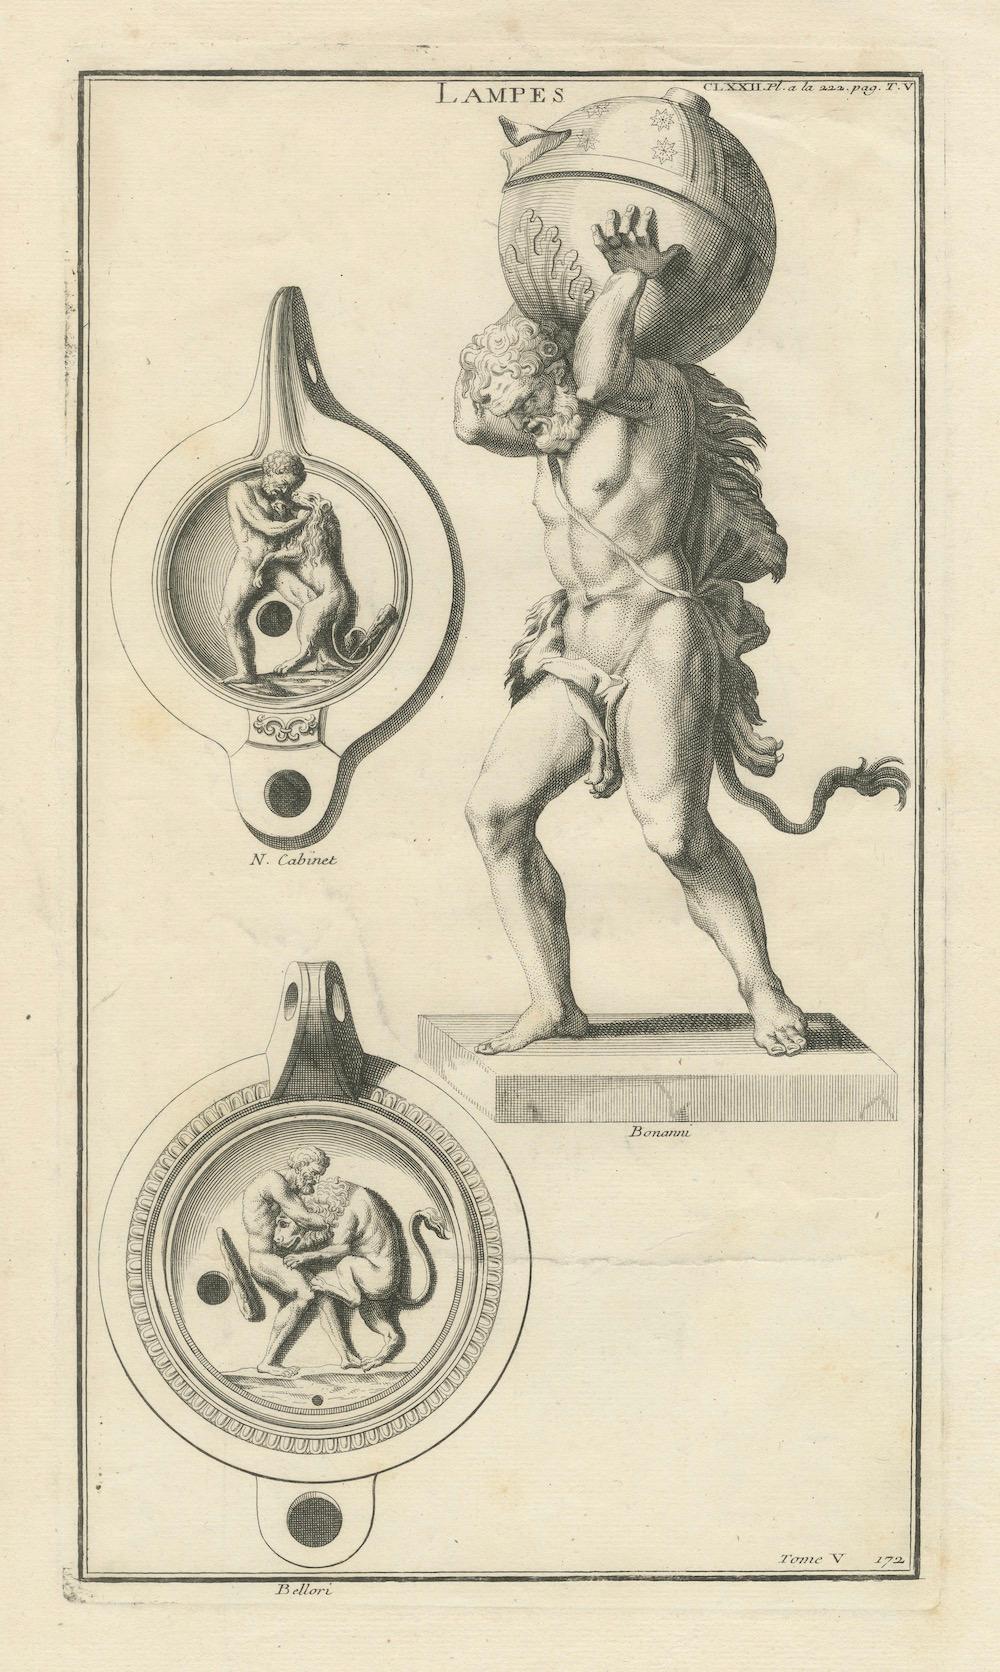 Paper Atlas Lamp Engraving: Strength and Mythology, 1722